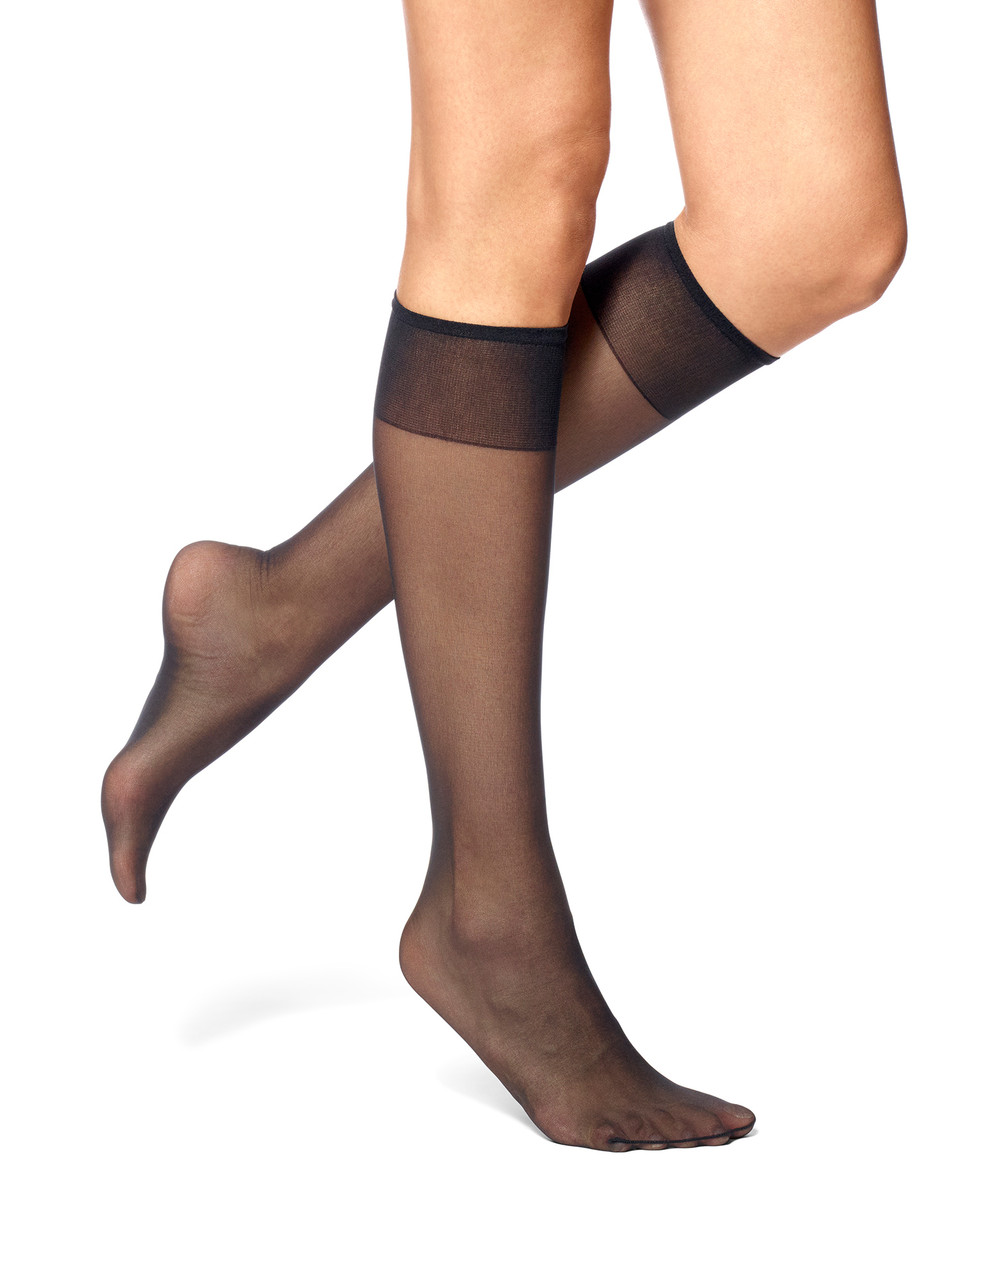 Absolute Support Made in USA - Plus Size Compression Knee High 20